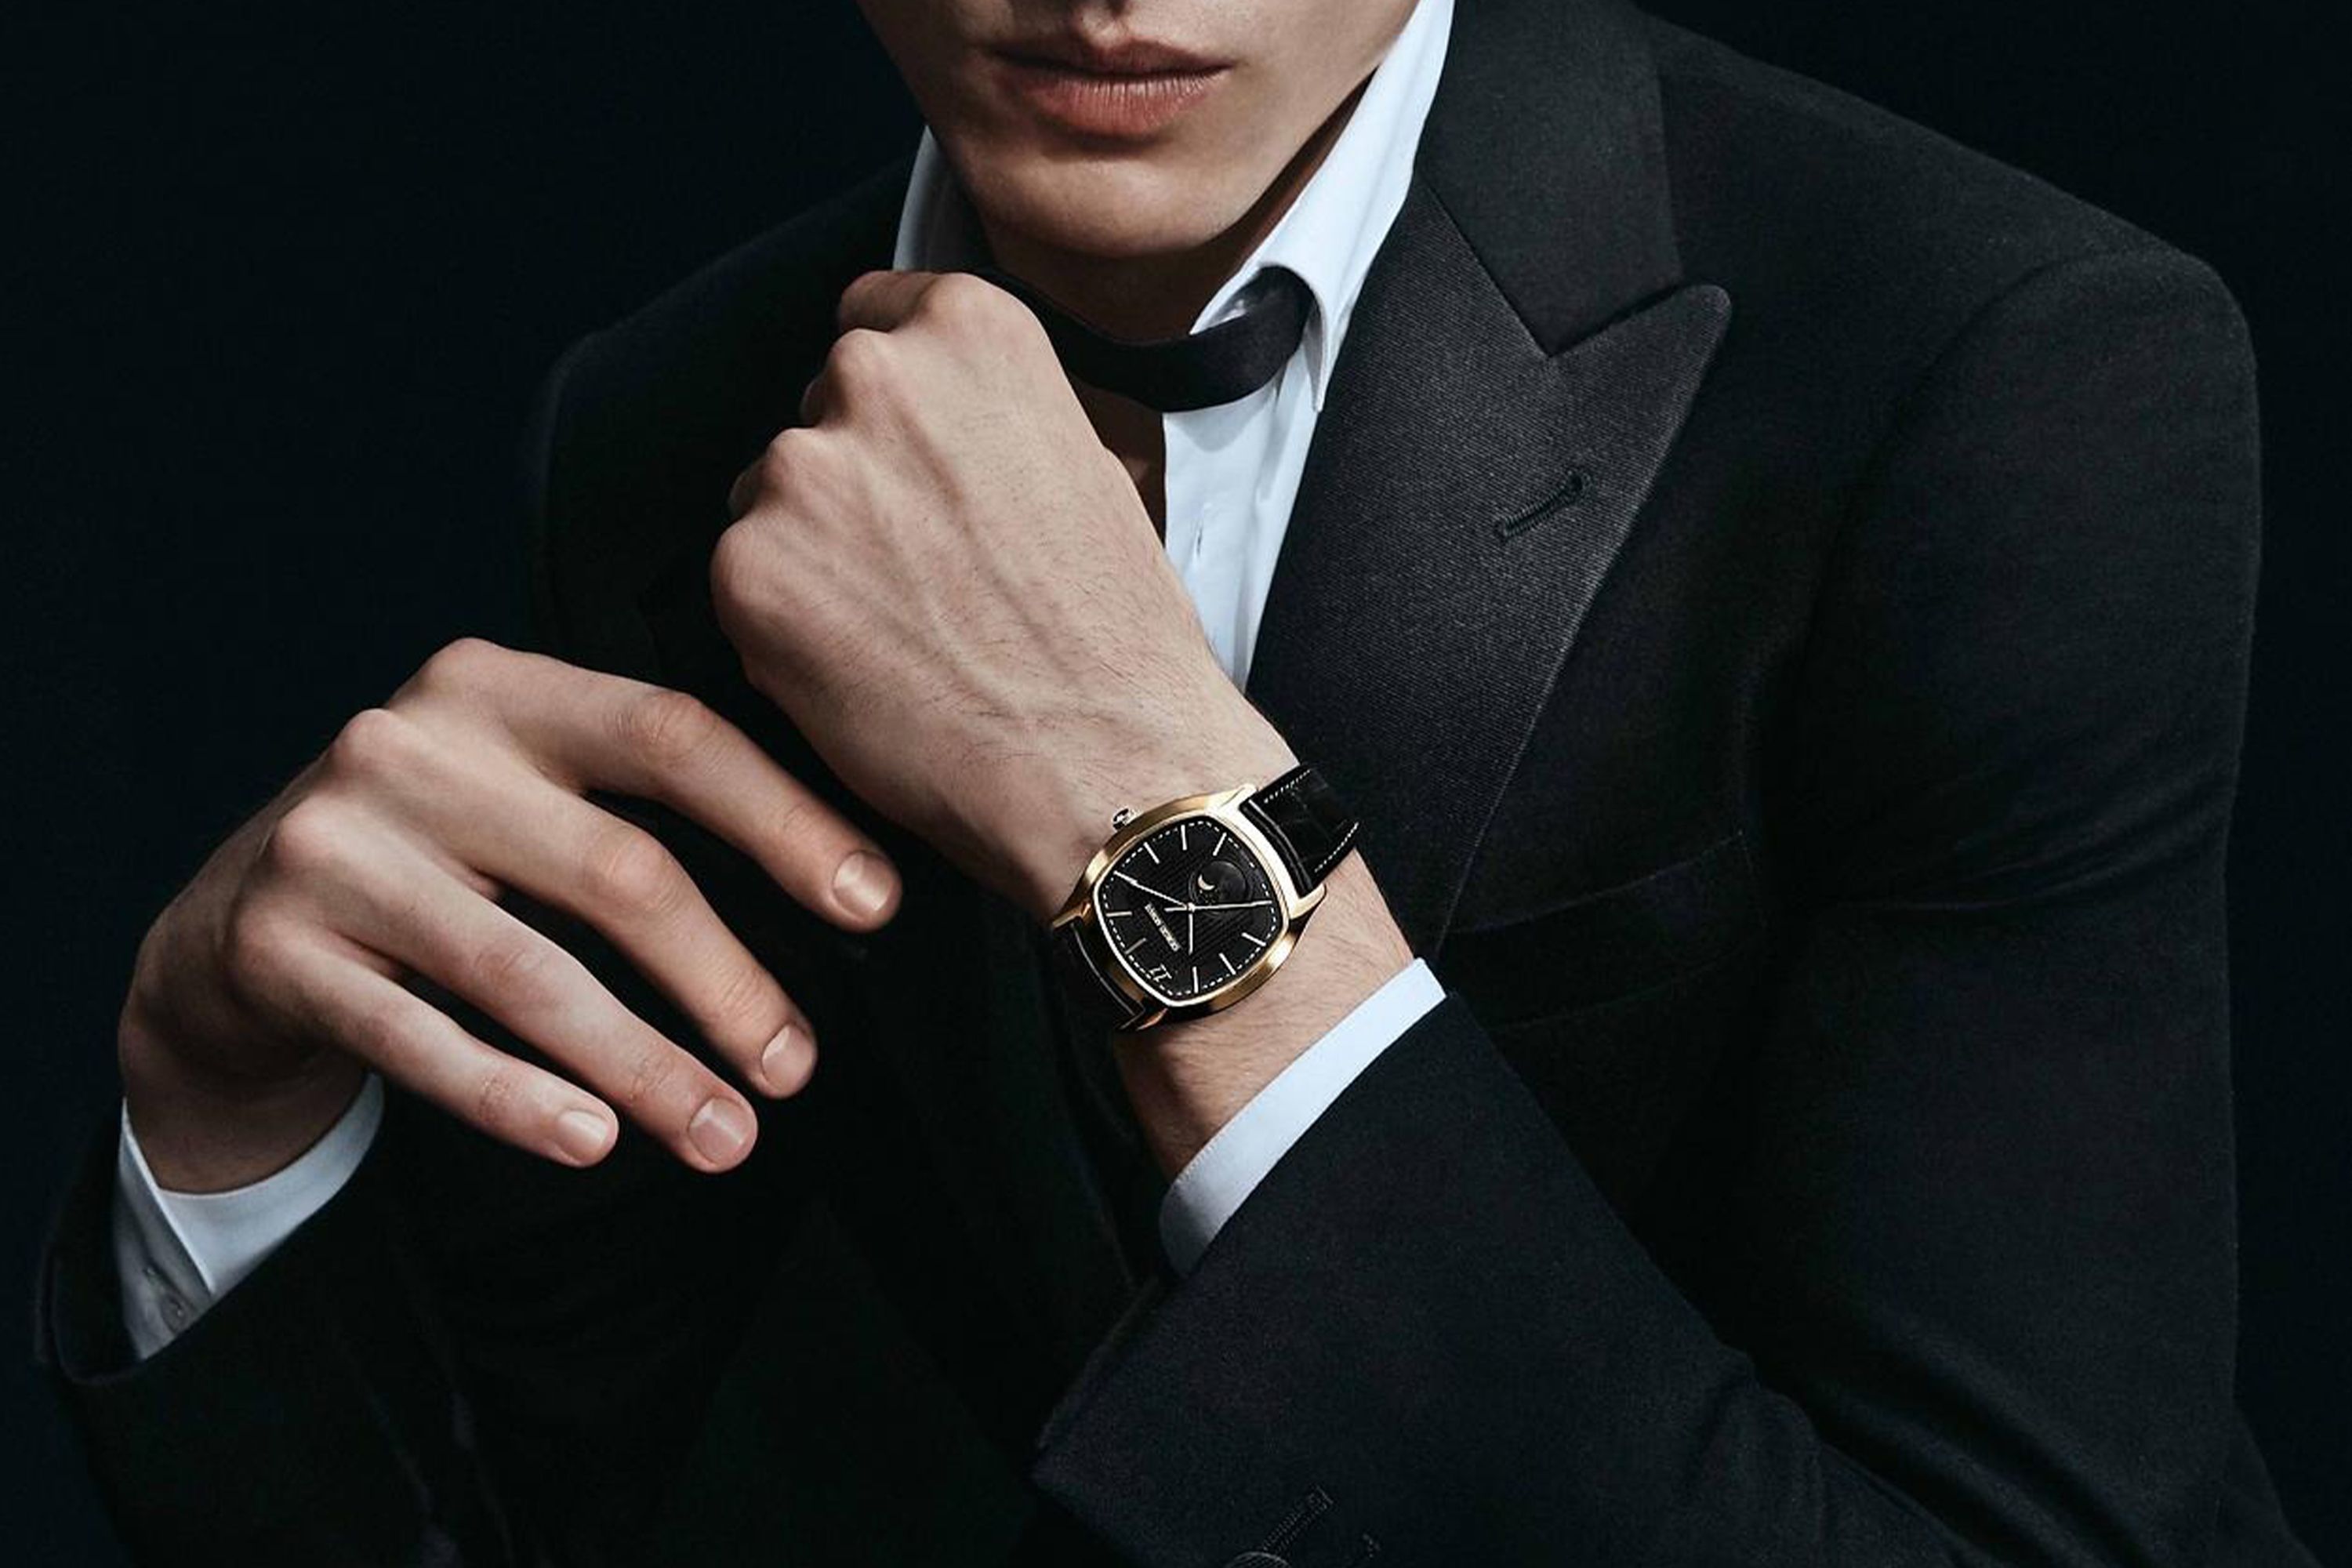 Armani Just Made Its First Serious Dress Watch